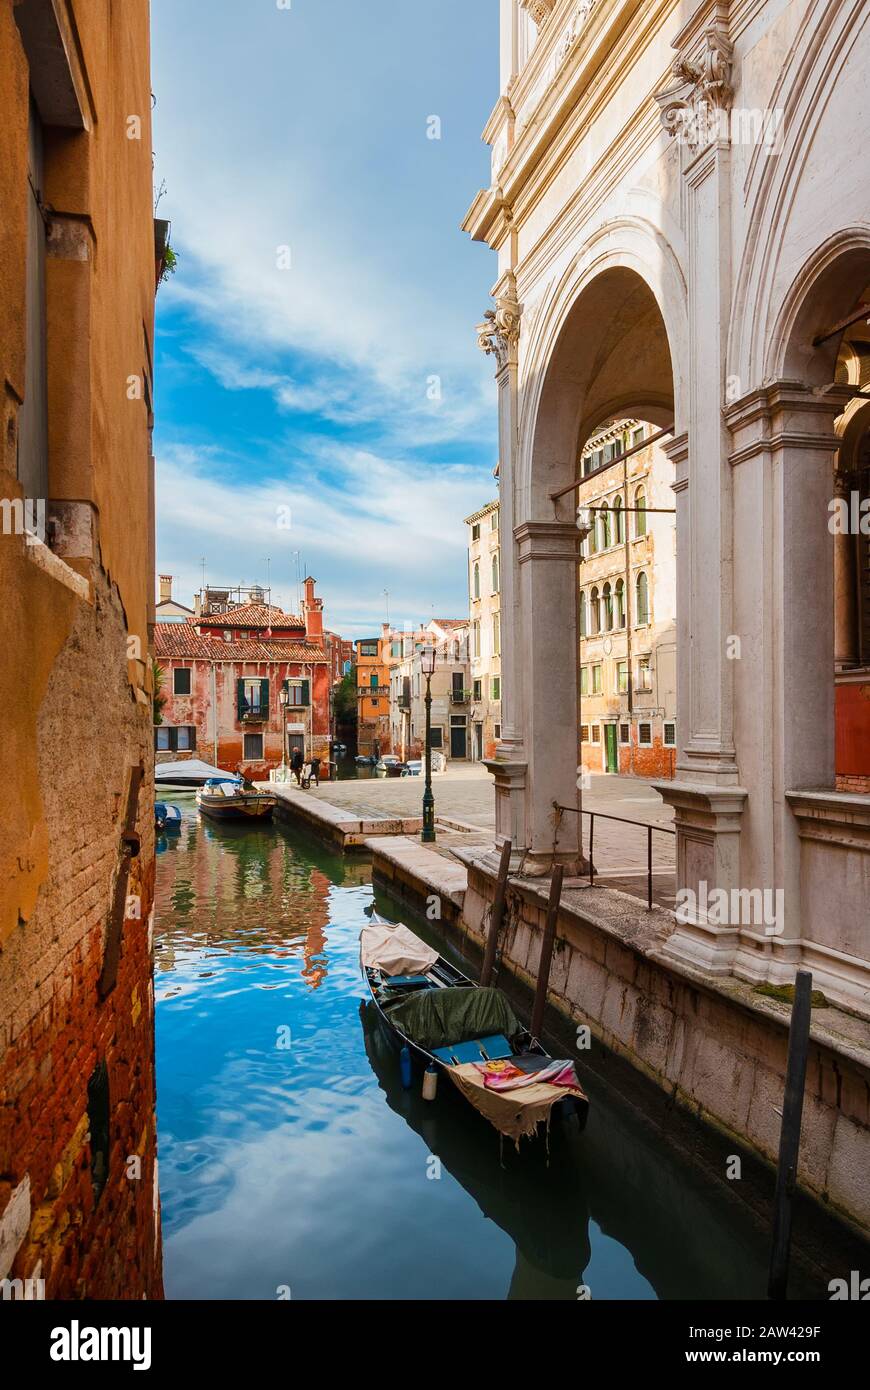 View of Rio della Frescada canal and Castelfrote area with its colorful houses just behind the famous Scuola Grande di San Rocco (Great School of St R Stock Photo